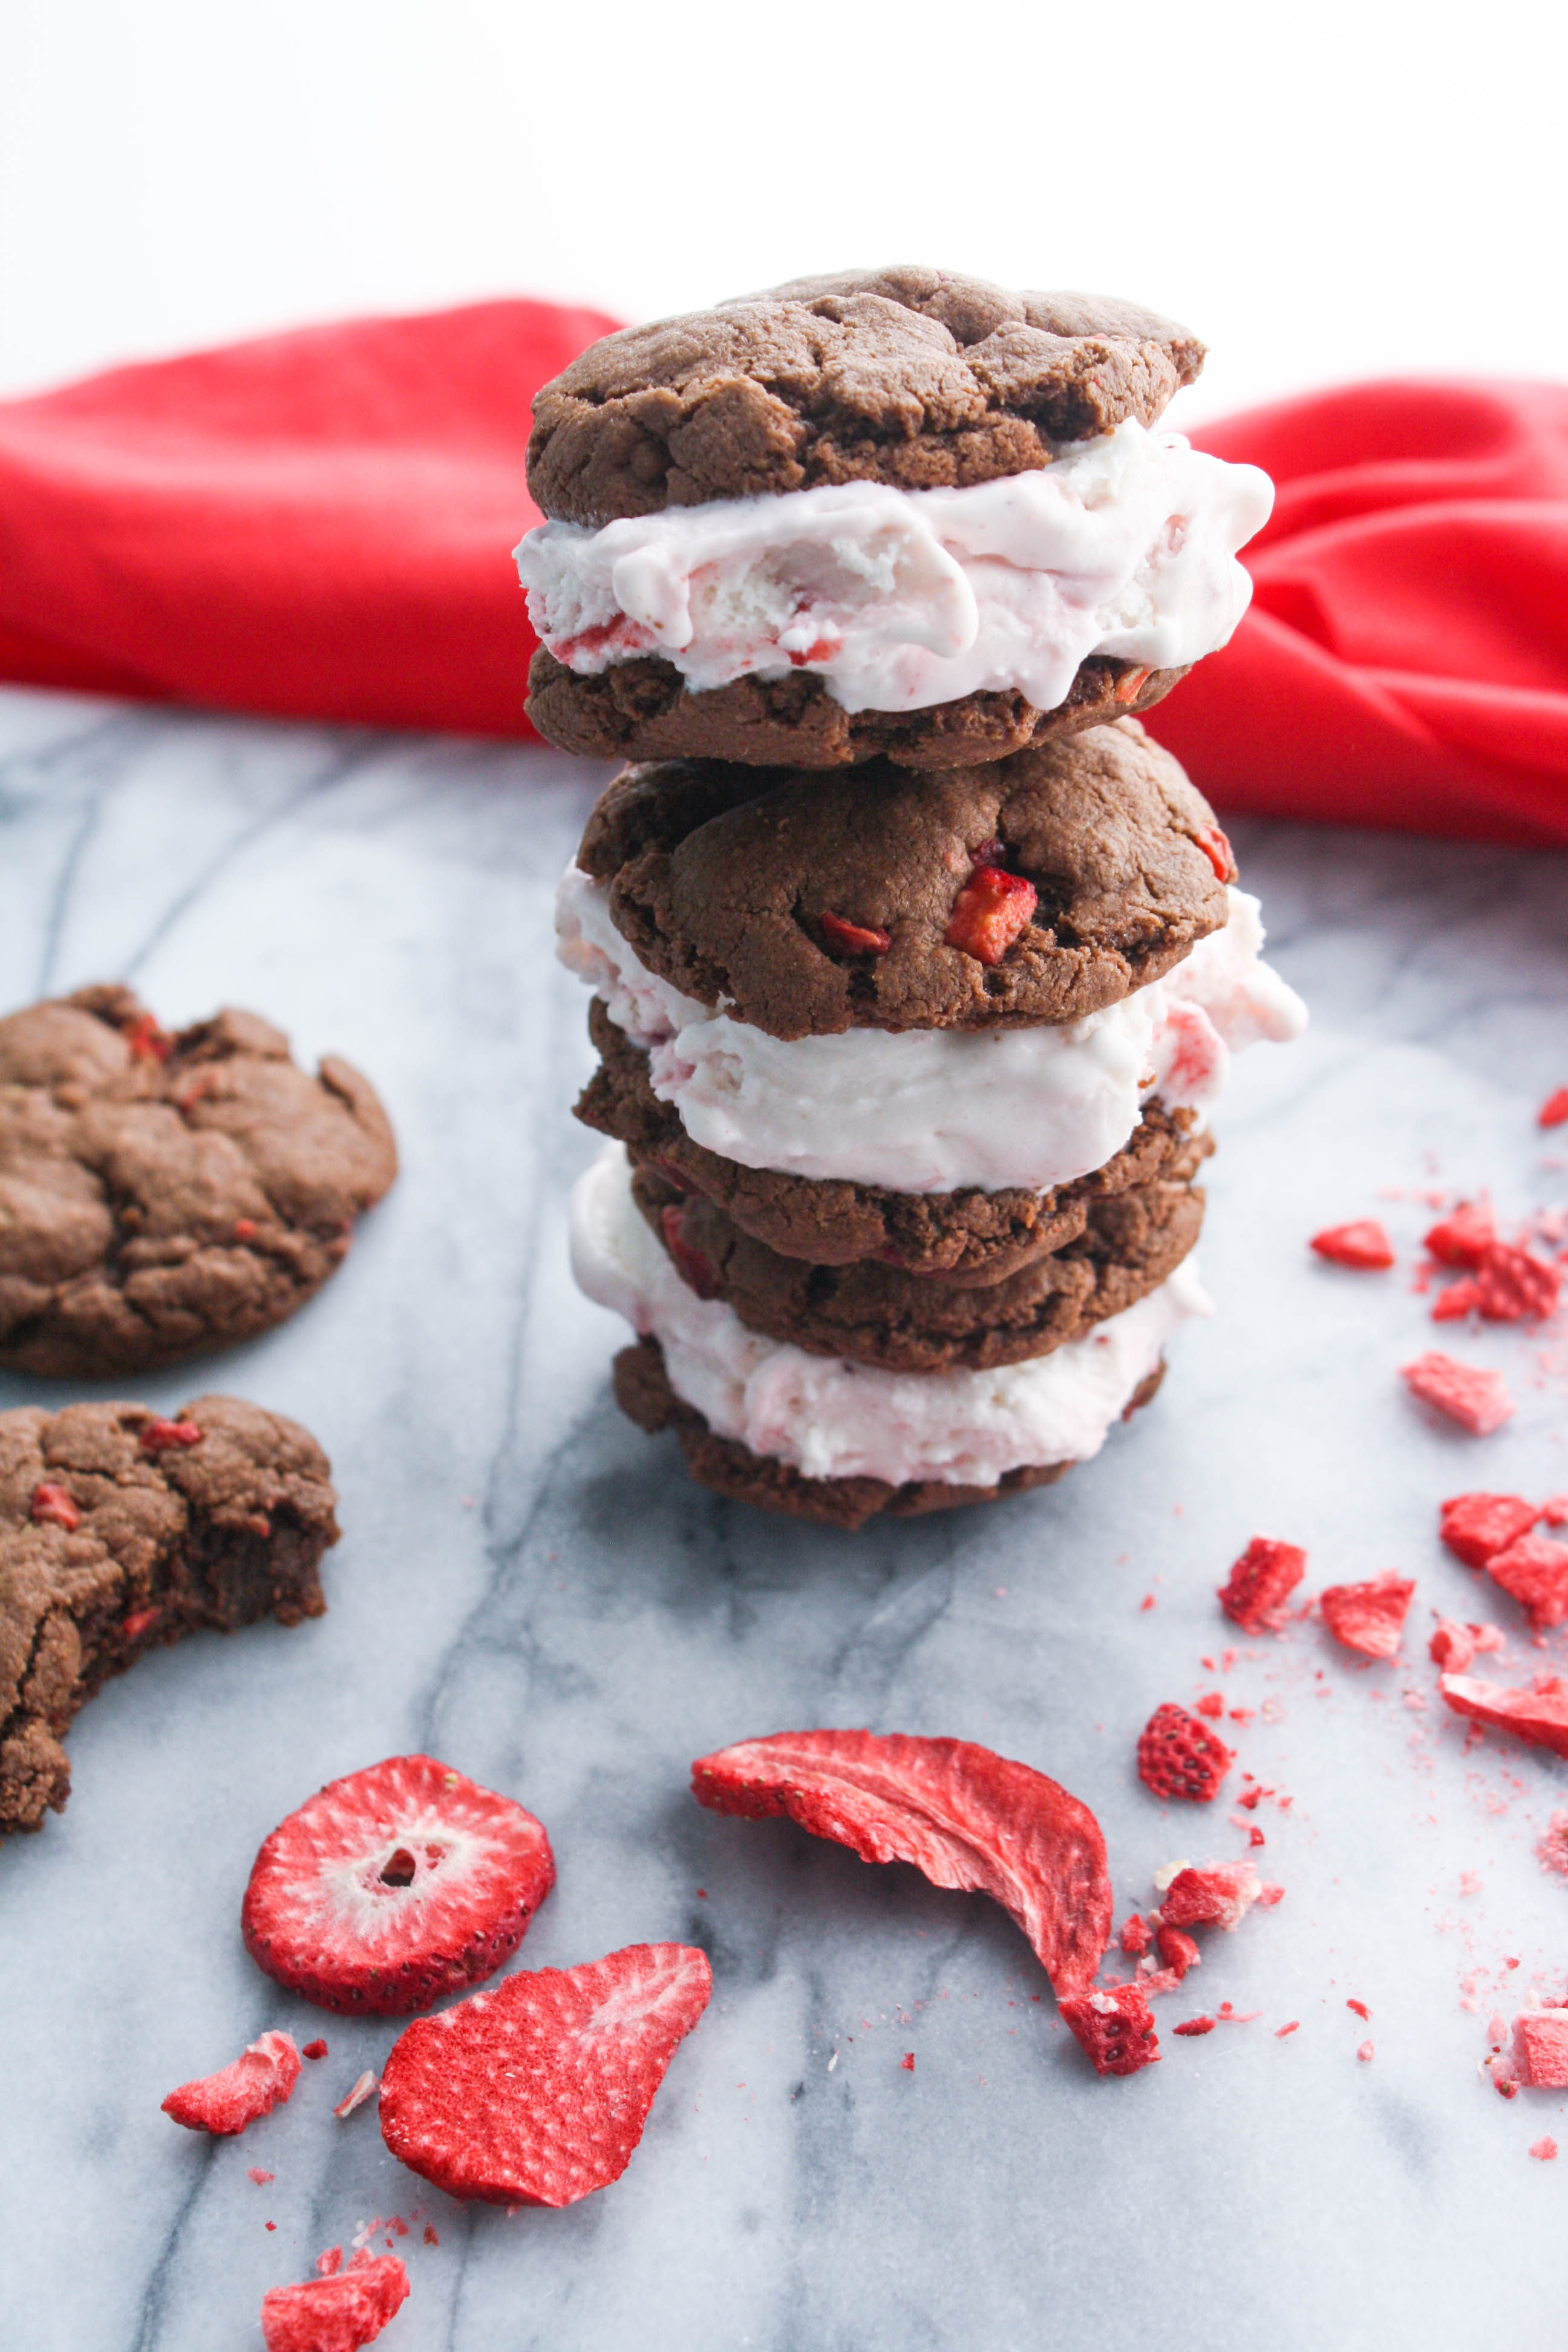 Strawberry-Nutella Cookie Ice Cream Sandwiches make a sweet treat for Valentine's Day! You'll love to serve these strawberry-Nutella cookie ice cream sandwiches to your love for Valentine's Day!